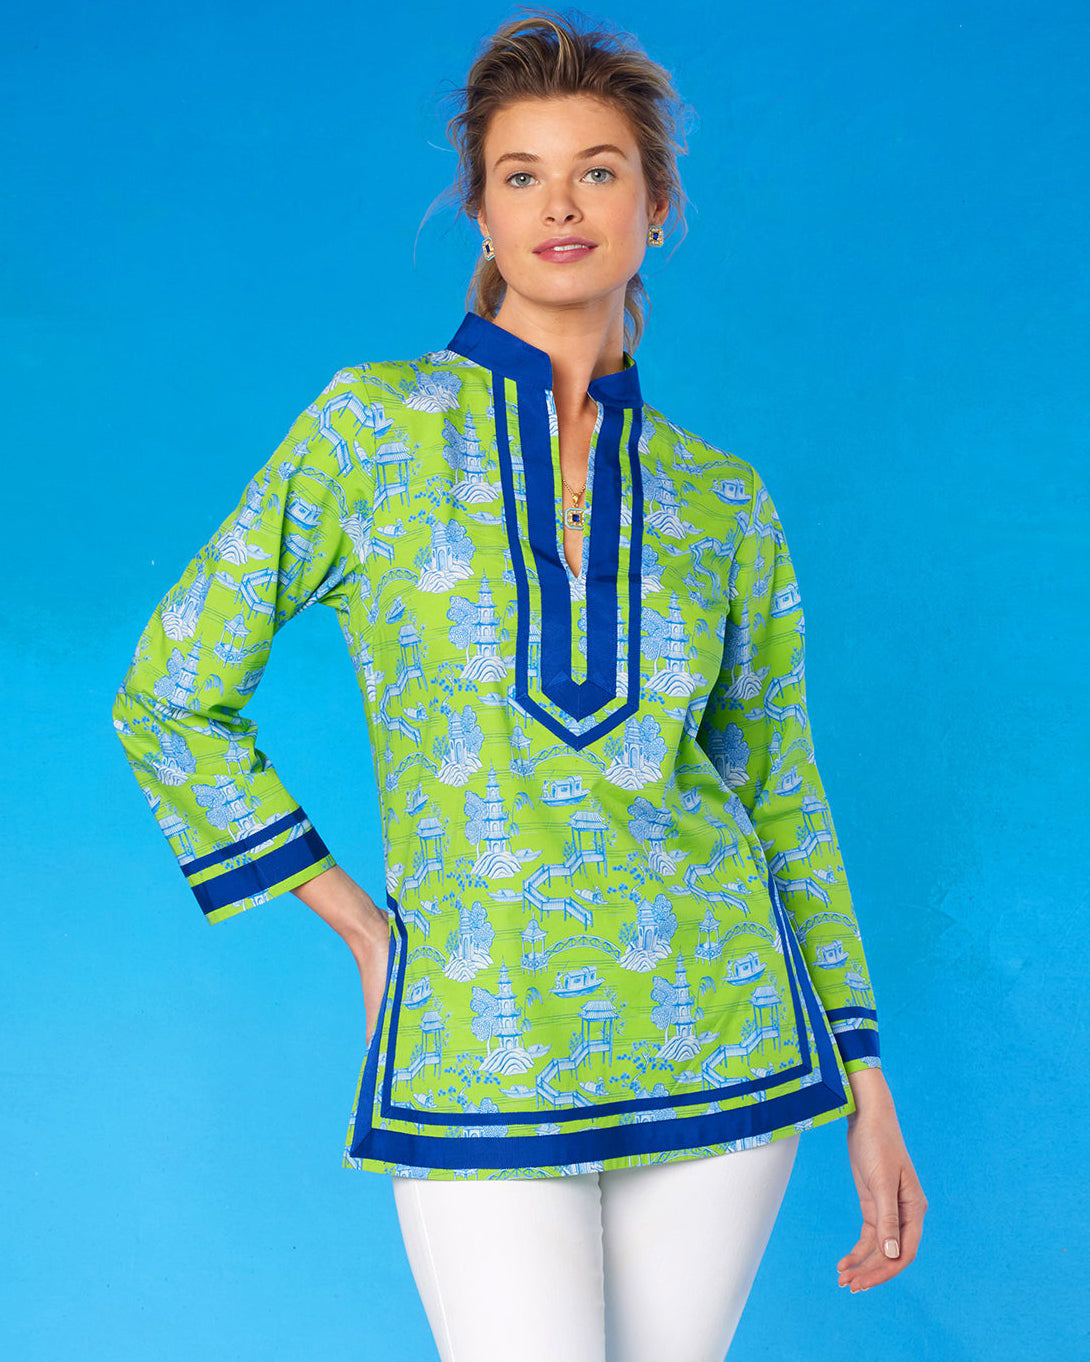 Capri Tunic in Pagoda Toile Lime Green and Blue